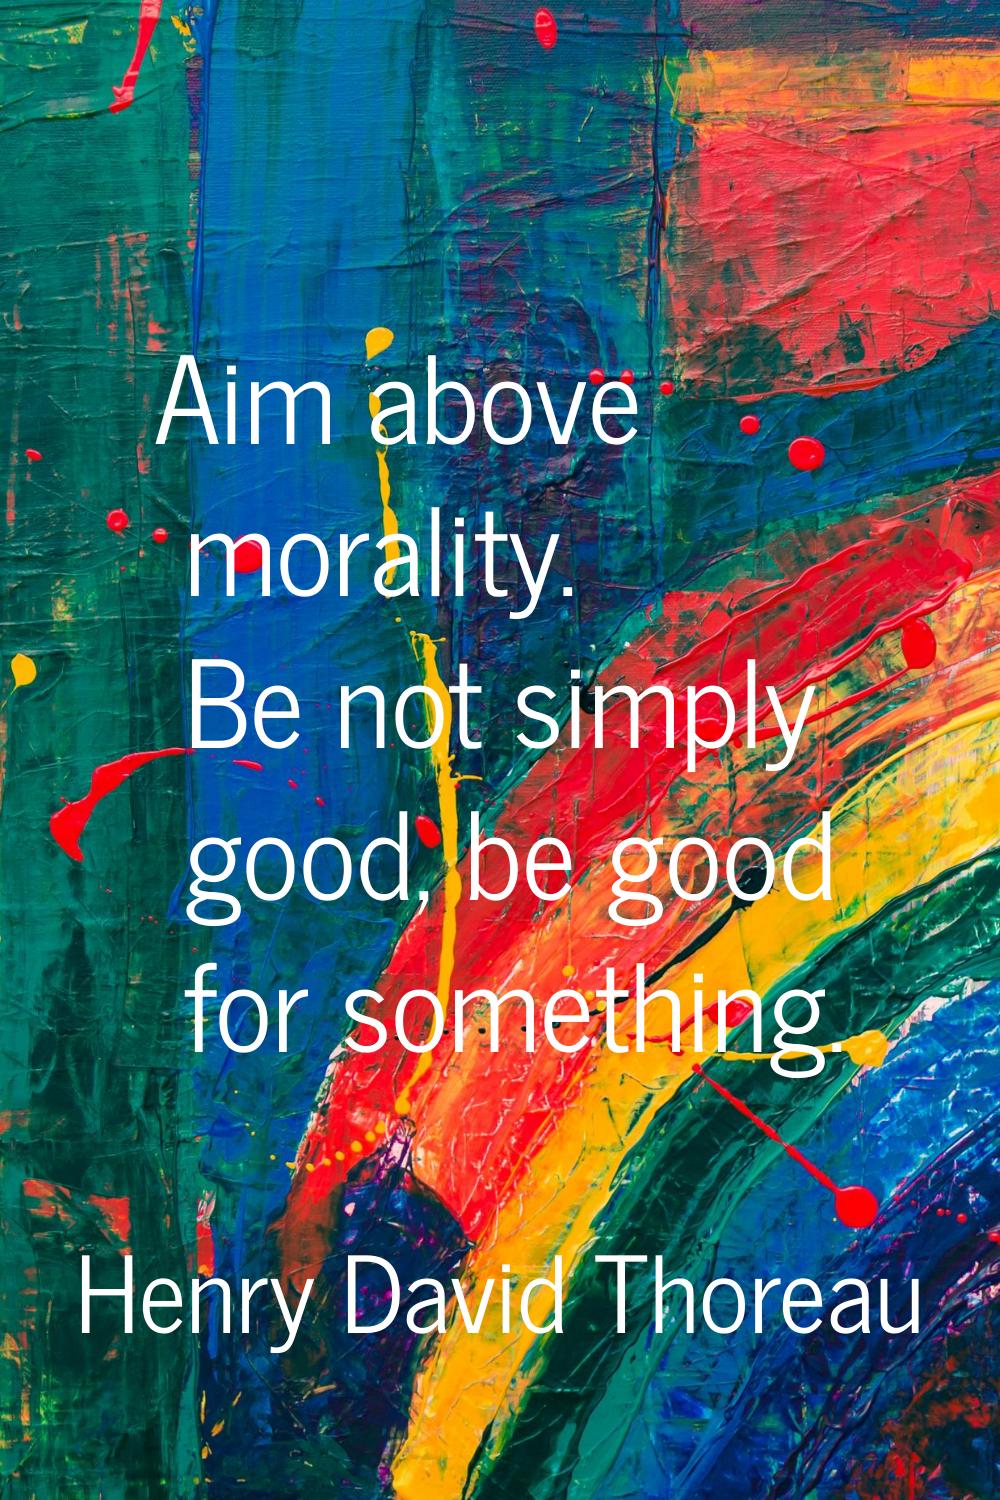 Aim above morality. Be not simply good, be good for something.